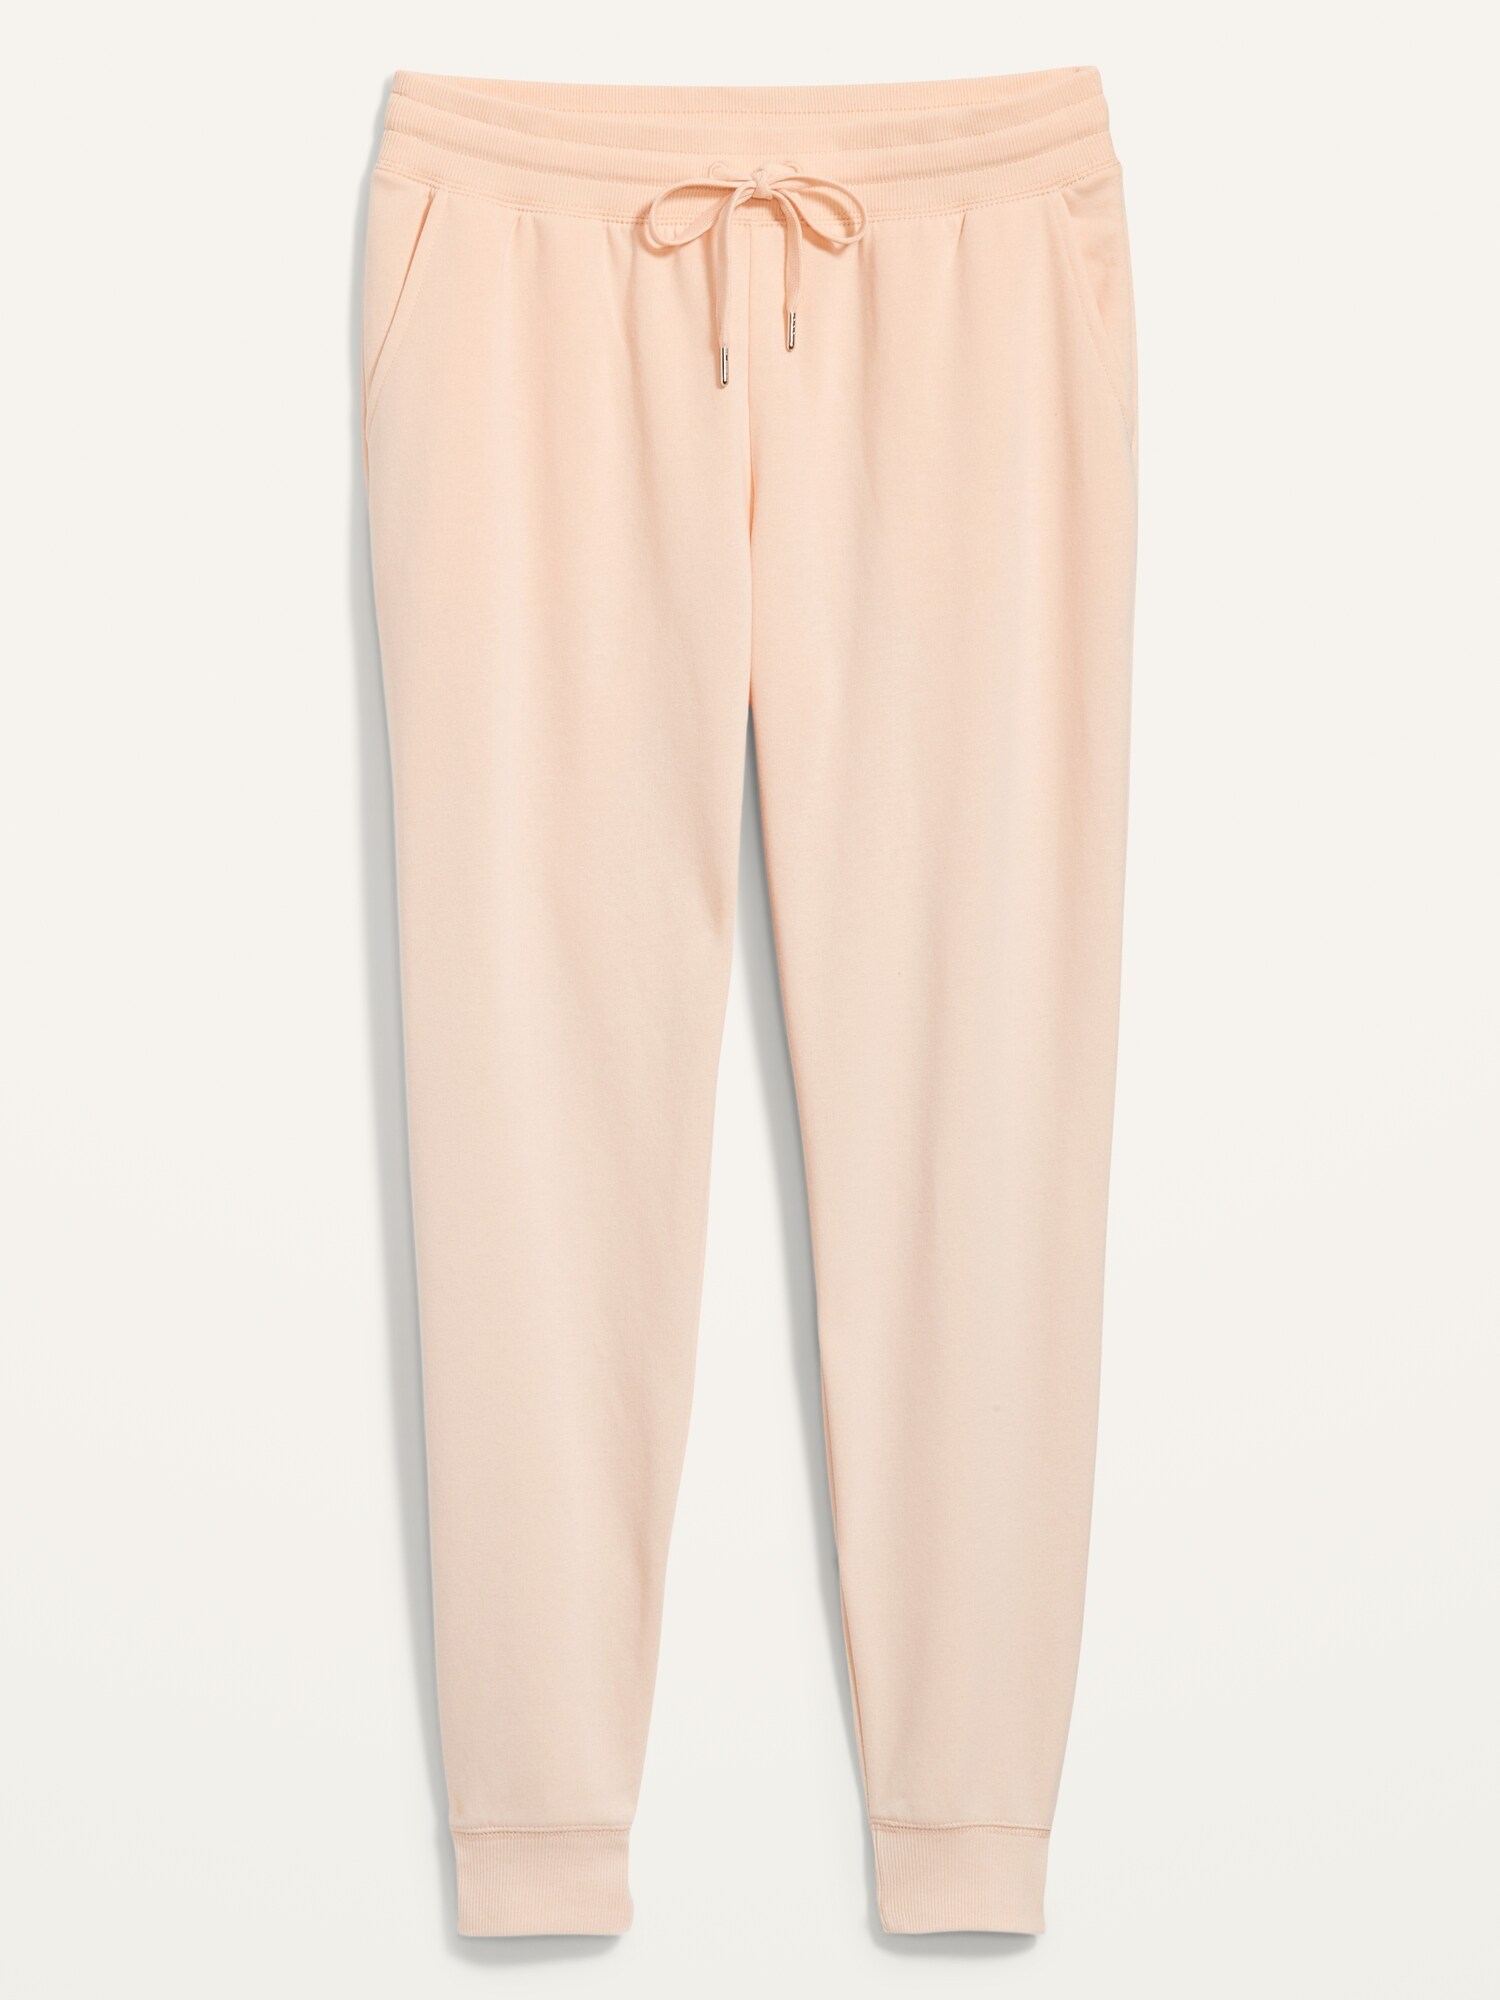 Mid-Rise Vintage Street Jogger Sweatpants for Women | Old Navy